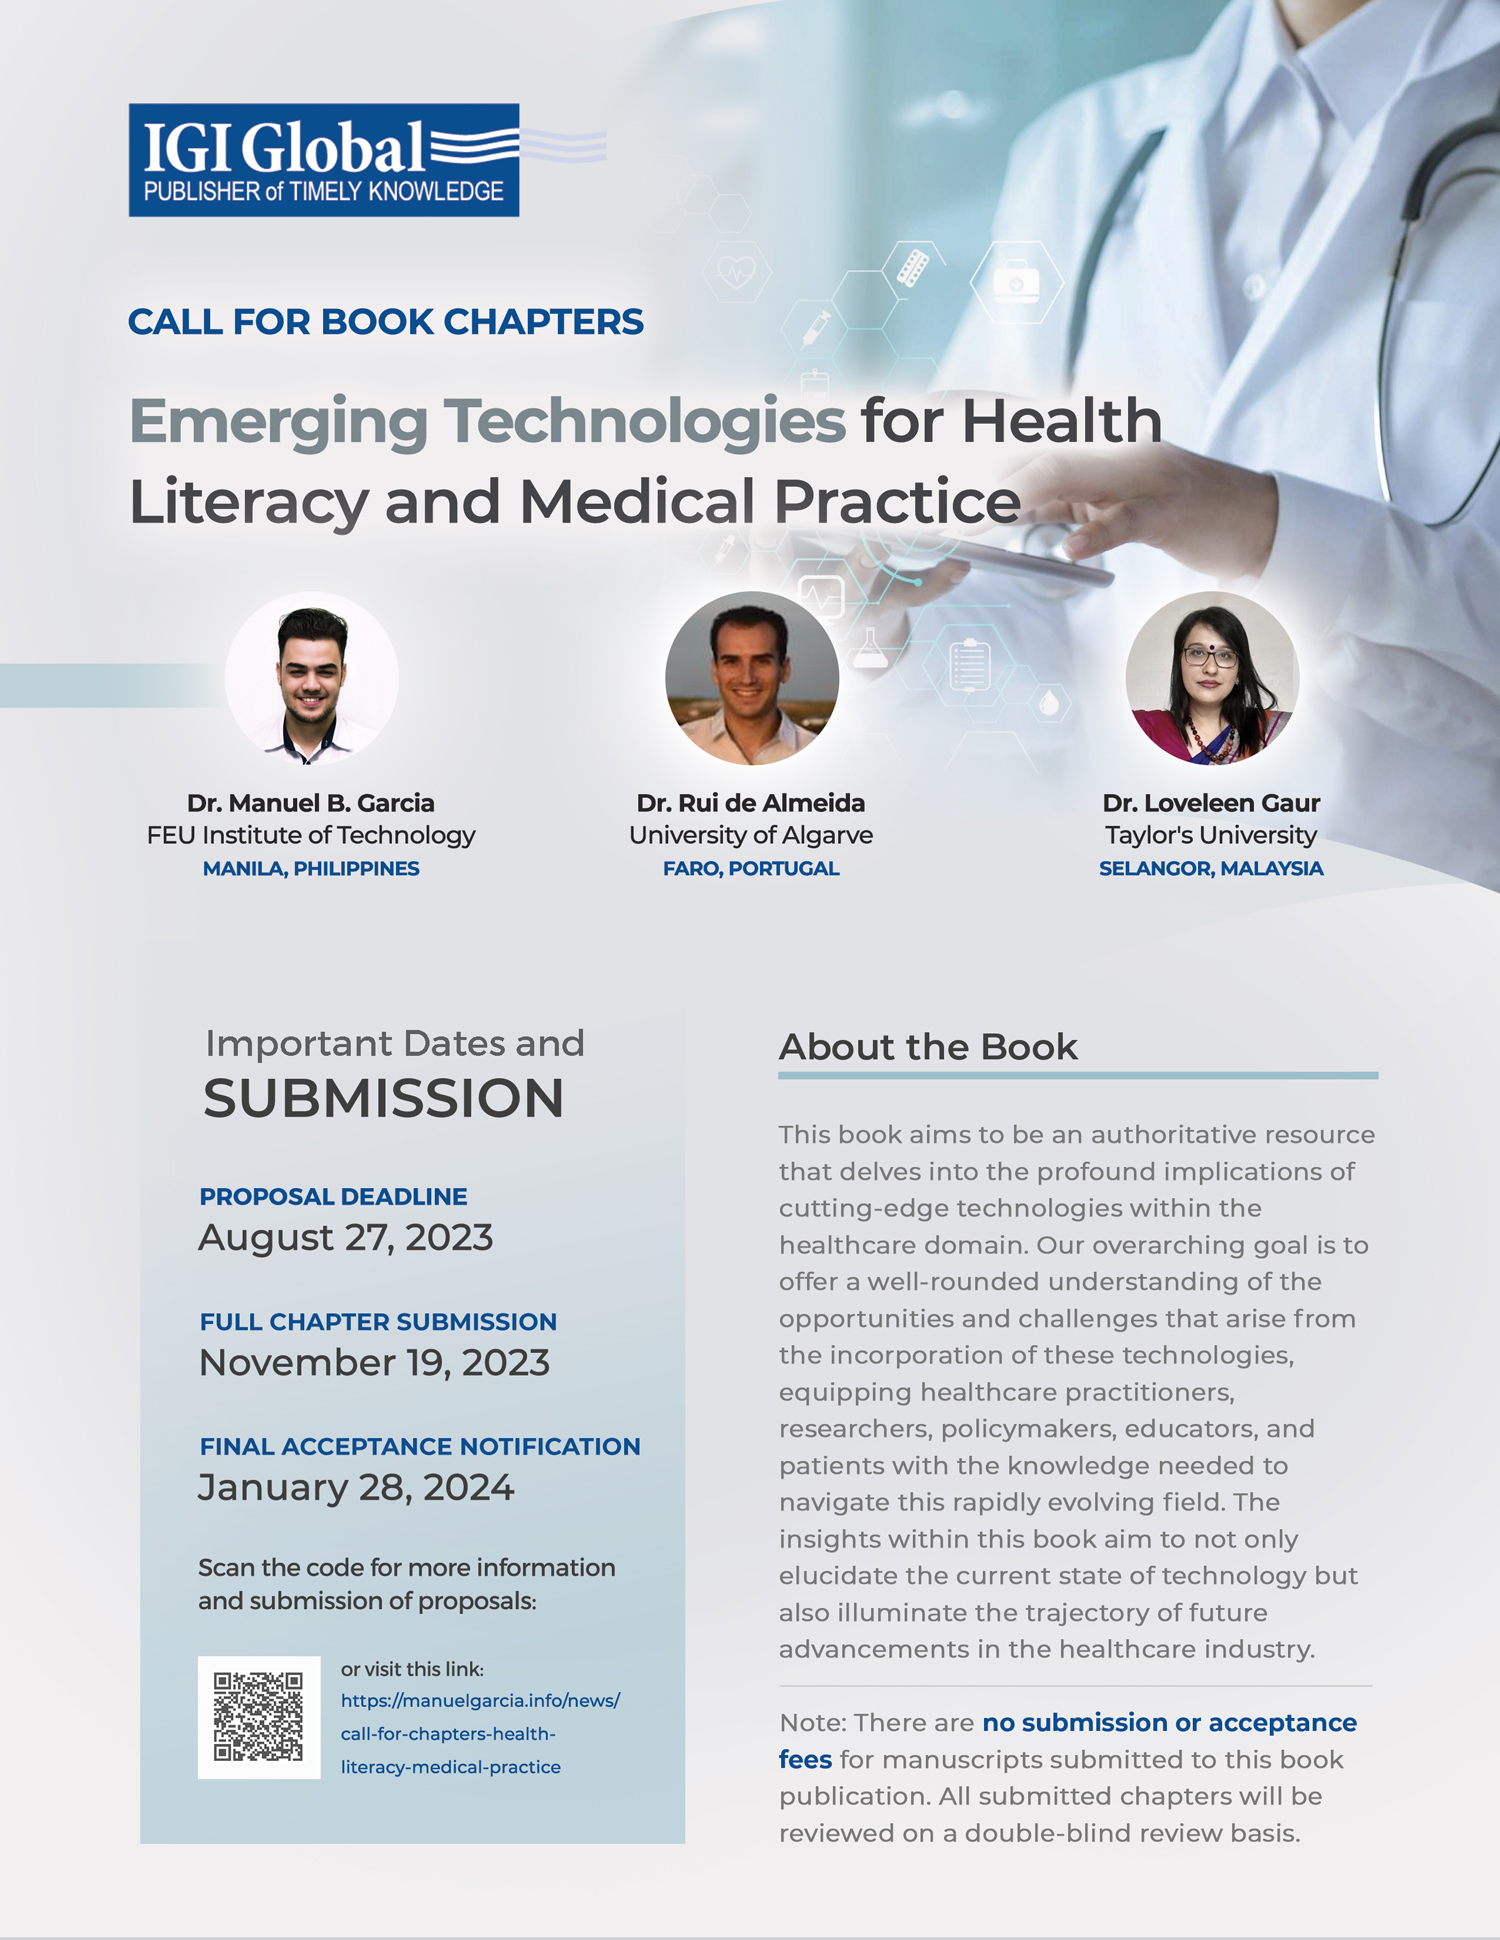 Call for Chapters: Emerging Technologies for Health Literacy and Medical Practice